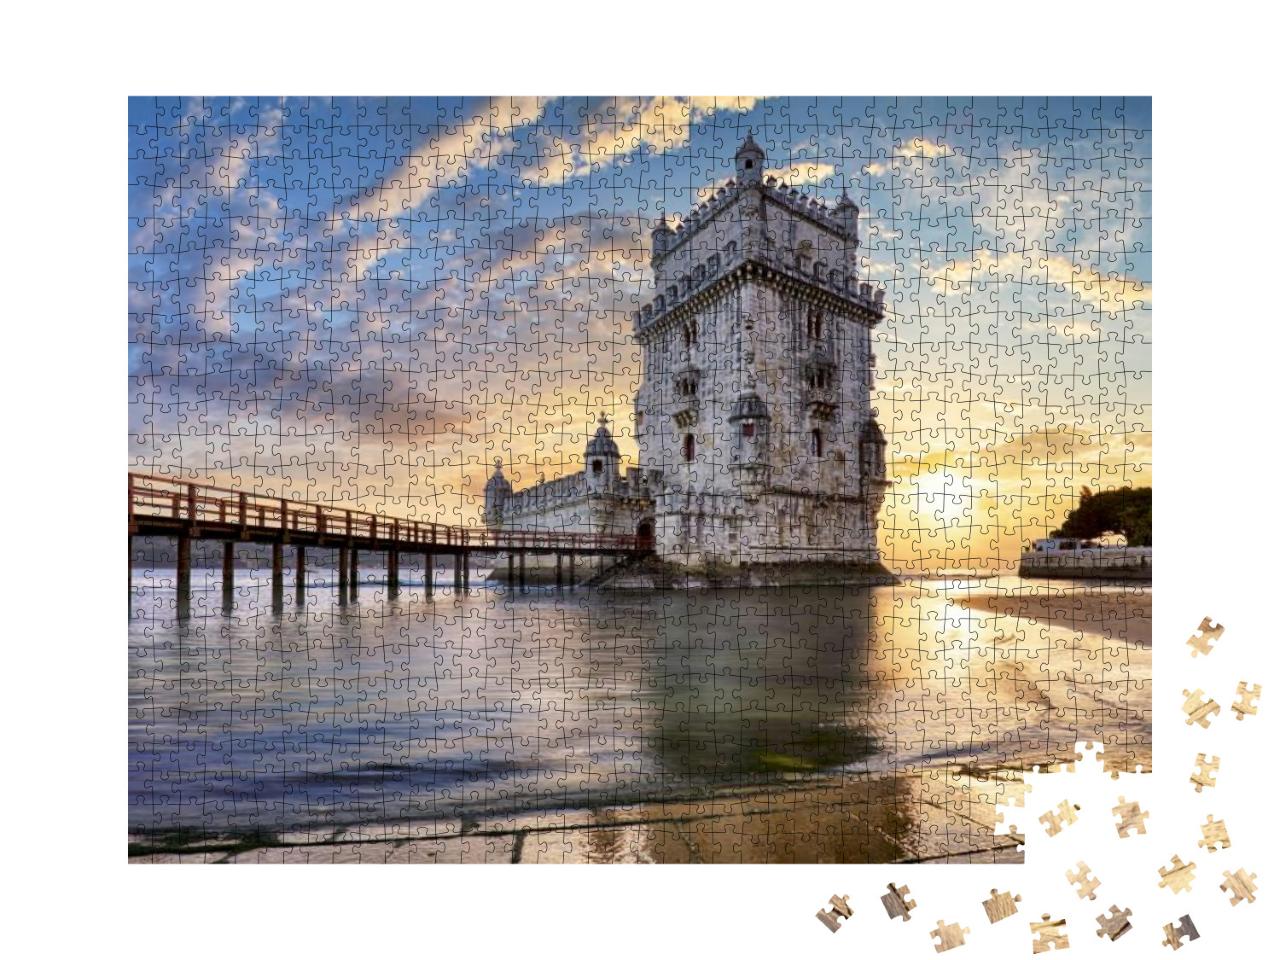 Lisbon, Belem Tower - Tagus River, Portugal... Jigsaw Puzzle with 1000 pieces